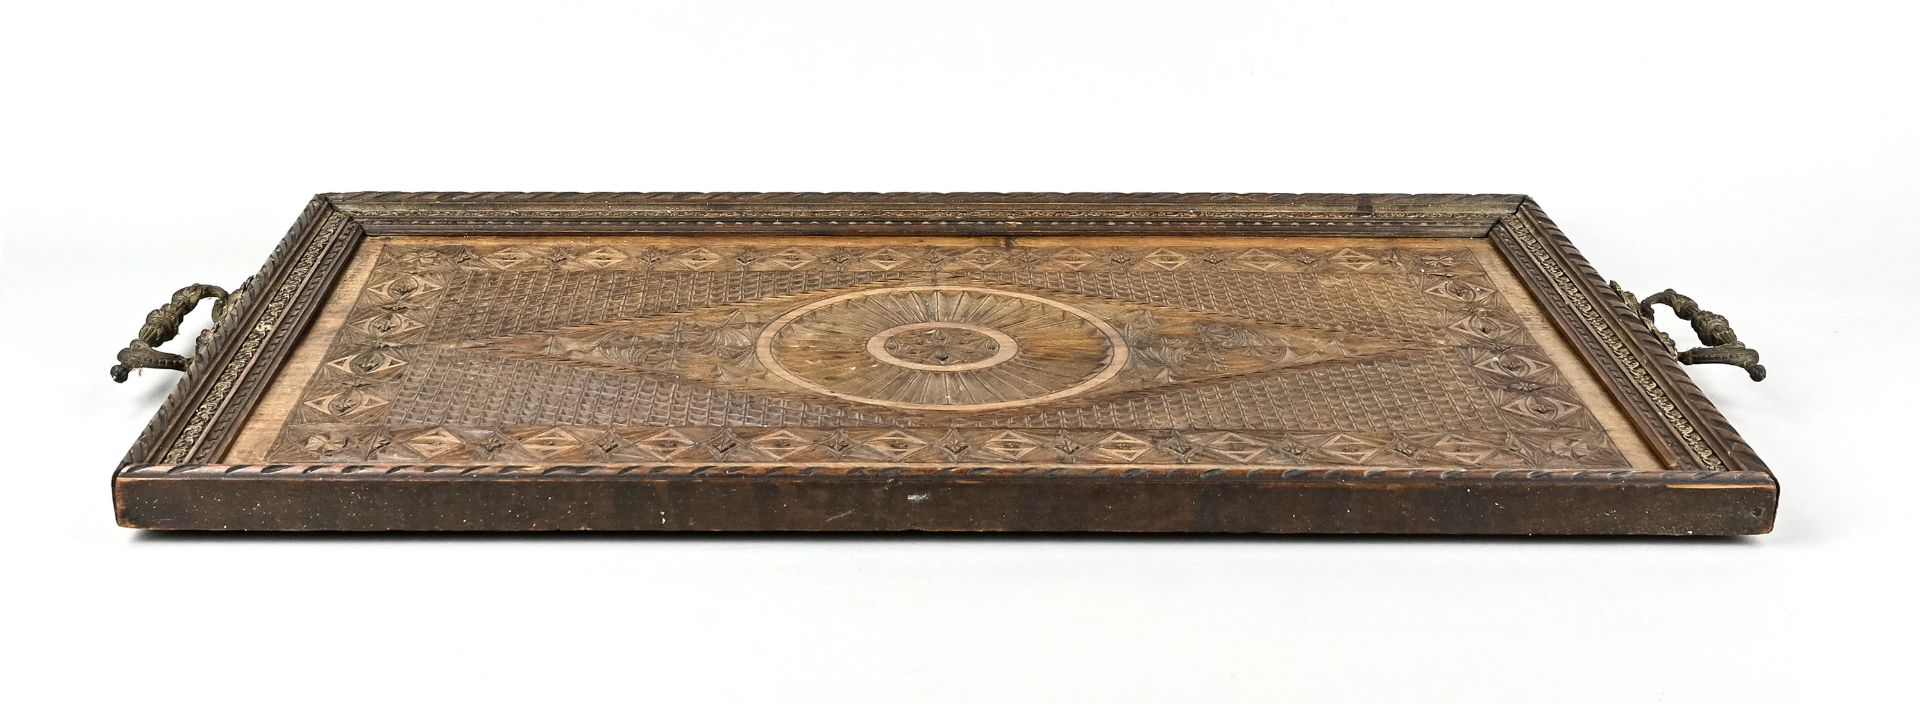 Large wooden tray, carved, sculptural metal handles, 60 x 35 cm - Image 2 of 4